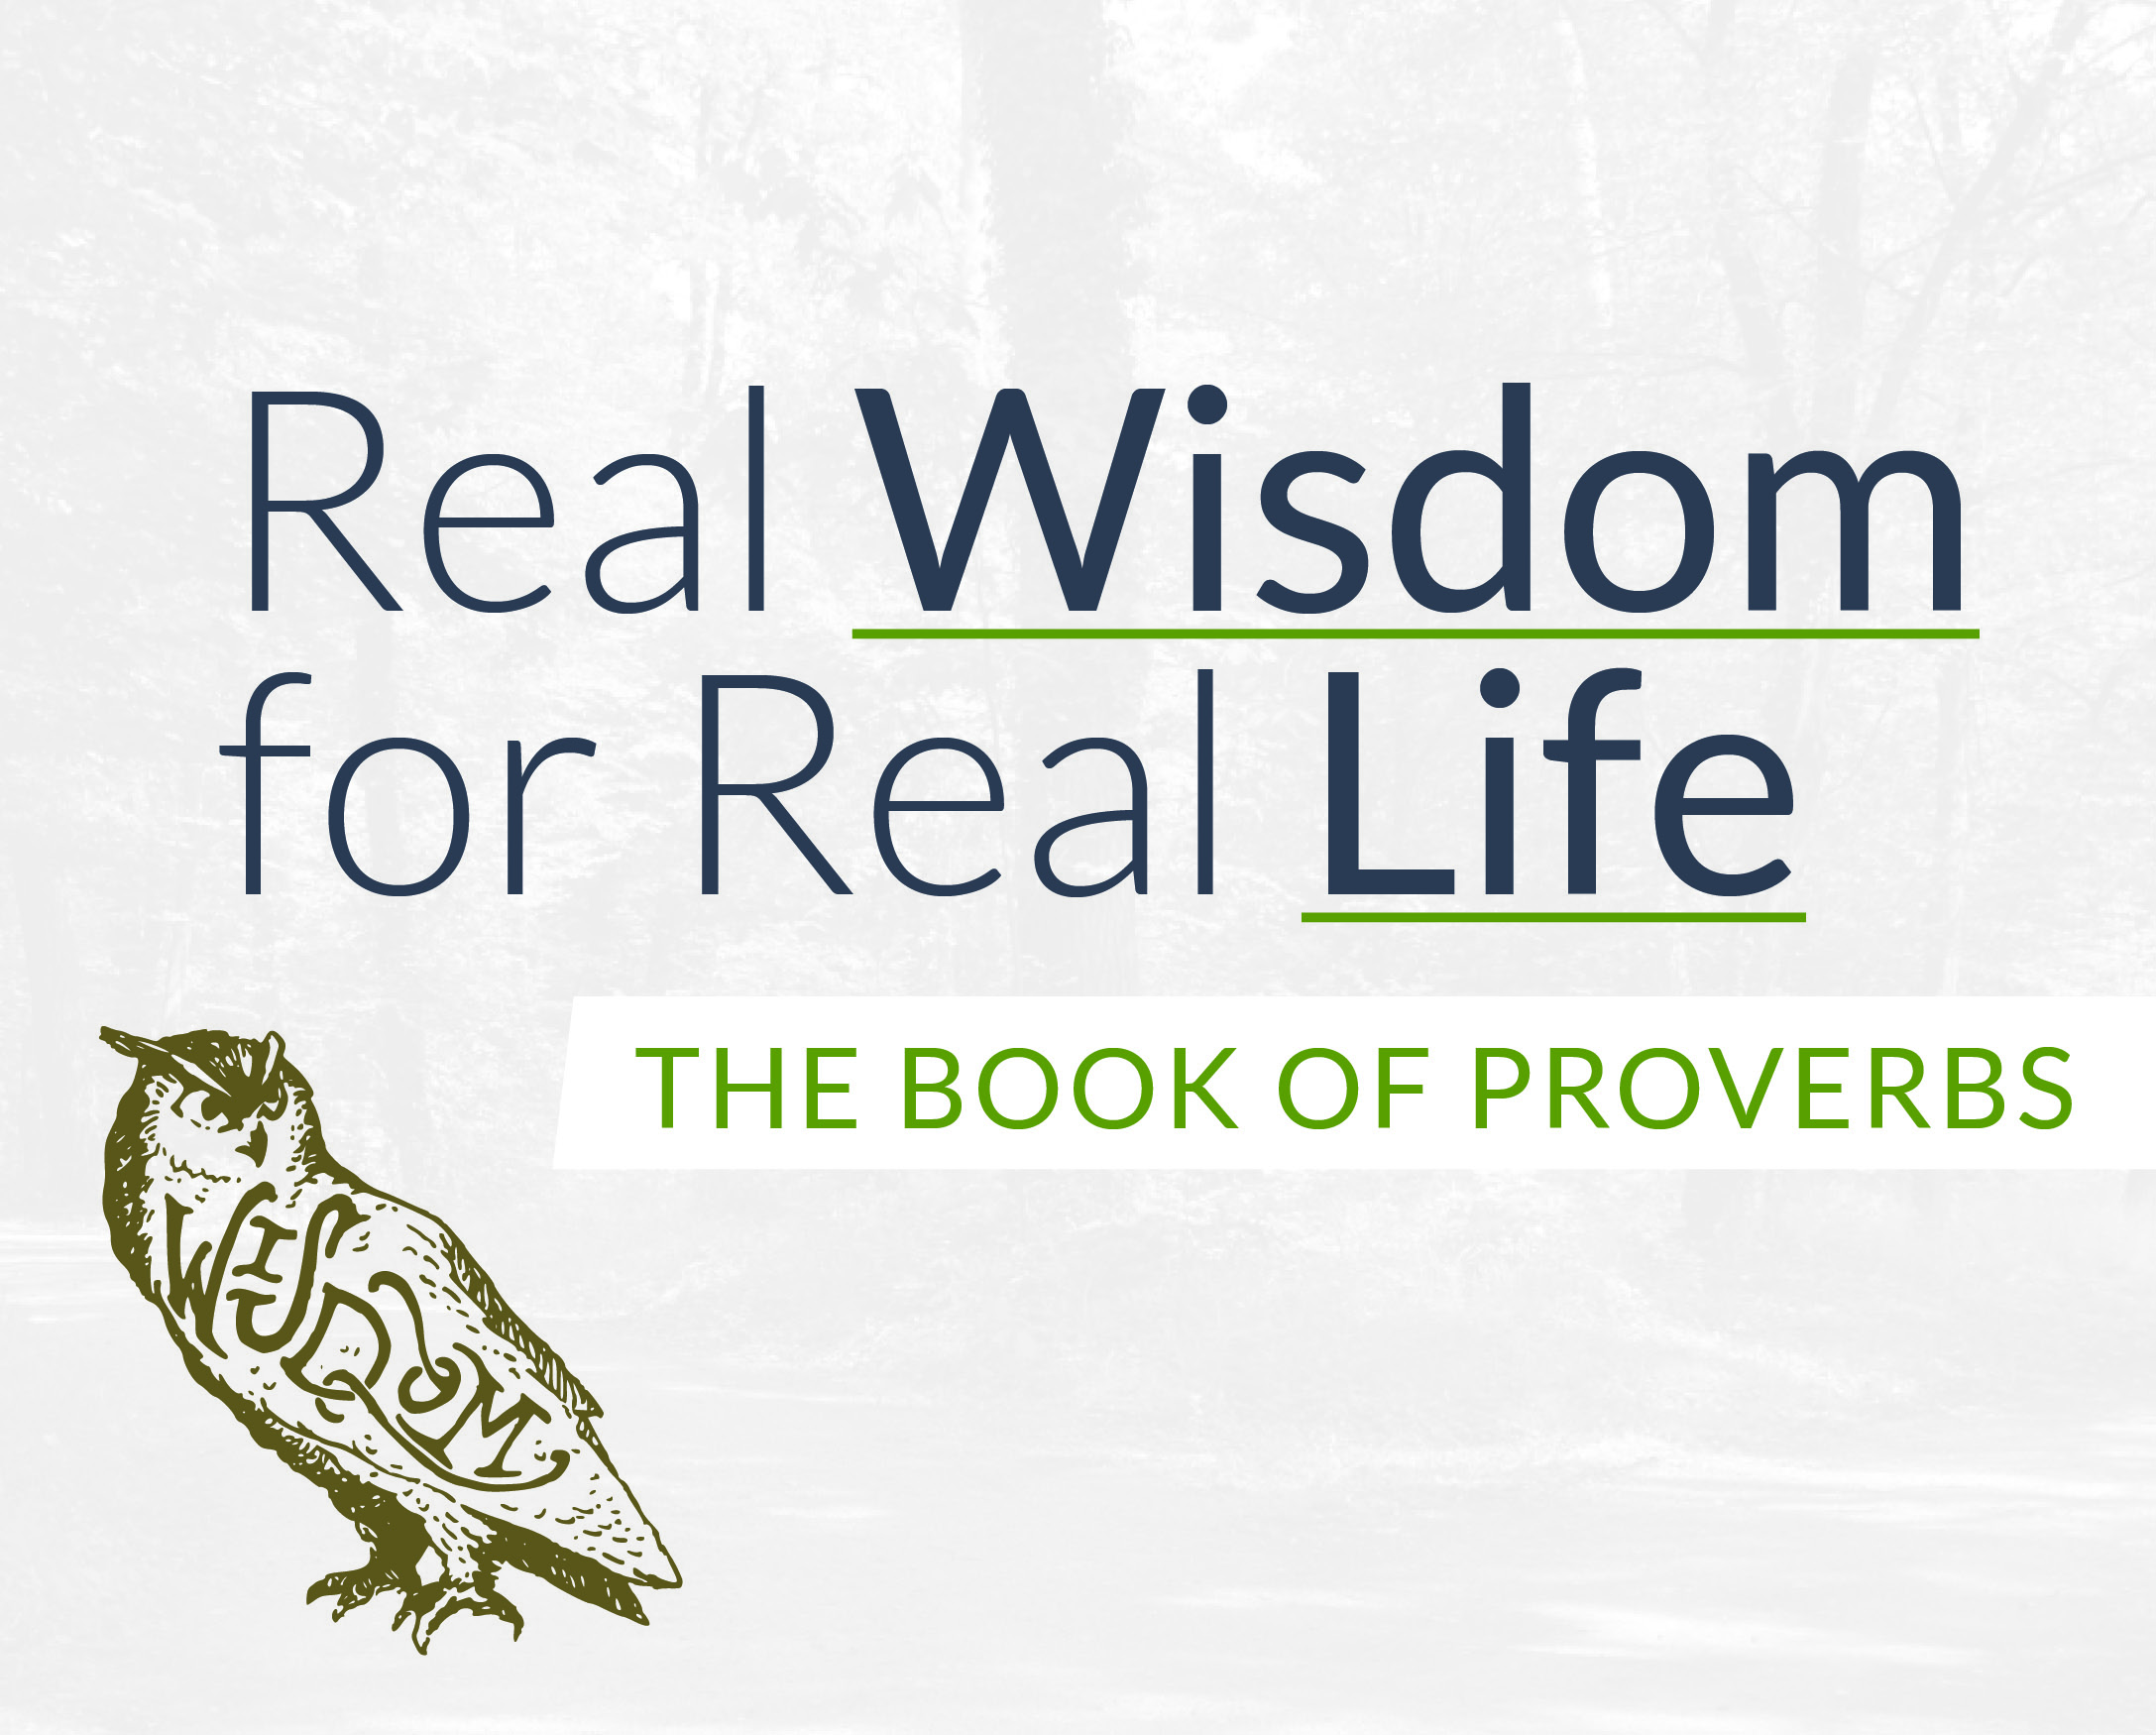 Real Wisdom for Real Life: Two Ways